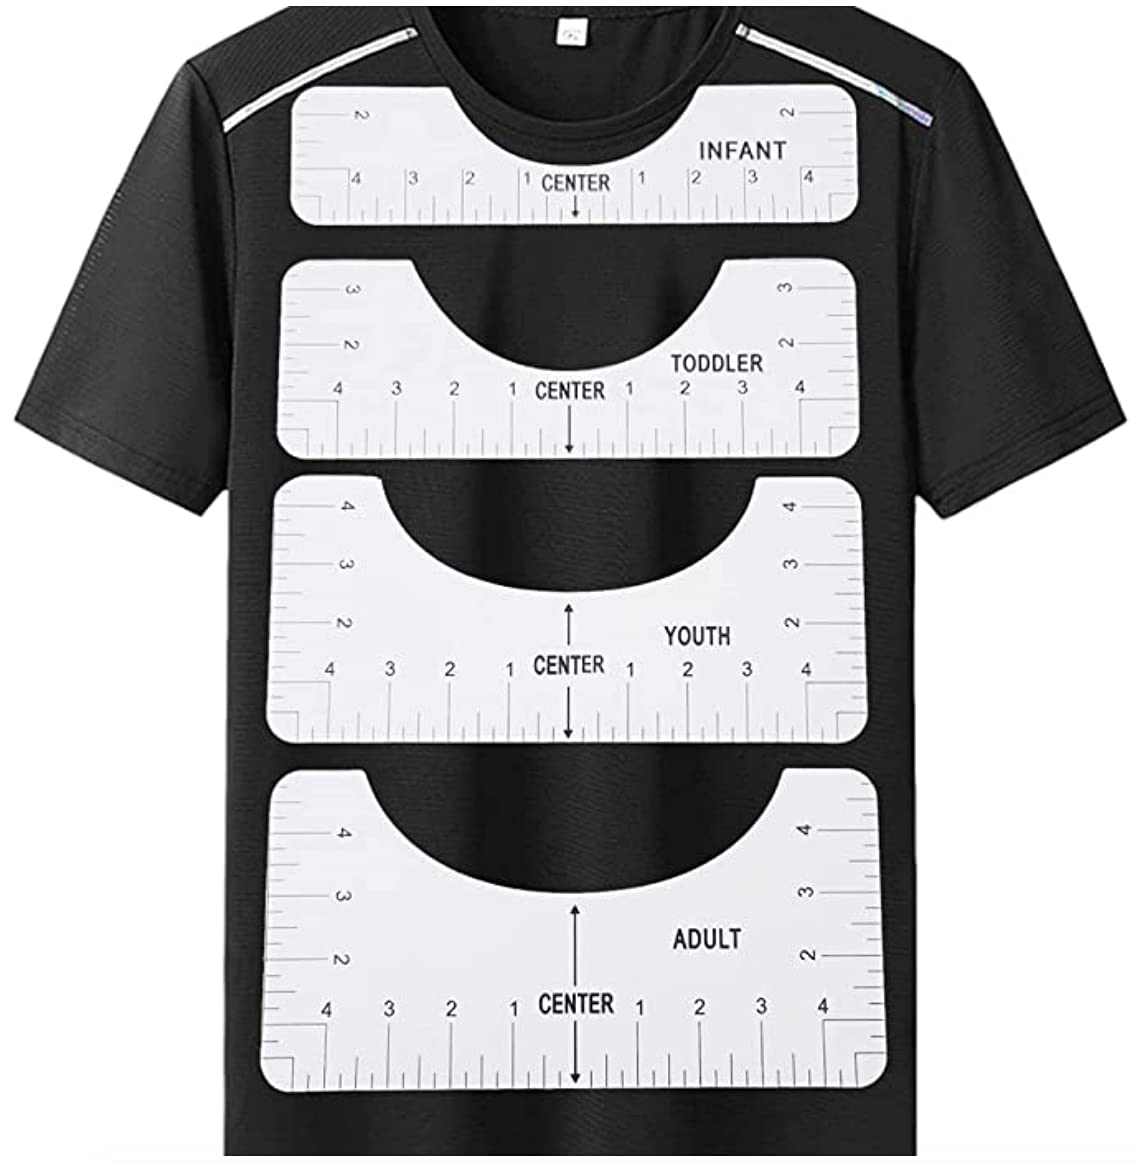 4pc Tshirt Ruler - Tshirt Ruler Guide for Vinyl Alignment - Tshirt  Alignment Tool - Tshirt Ruler Guide for Heat Press to Center Your Designs  for Infant, Toddler, Youth, and Adult Sizing